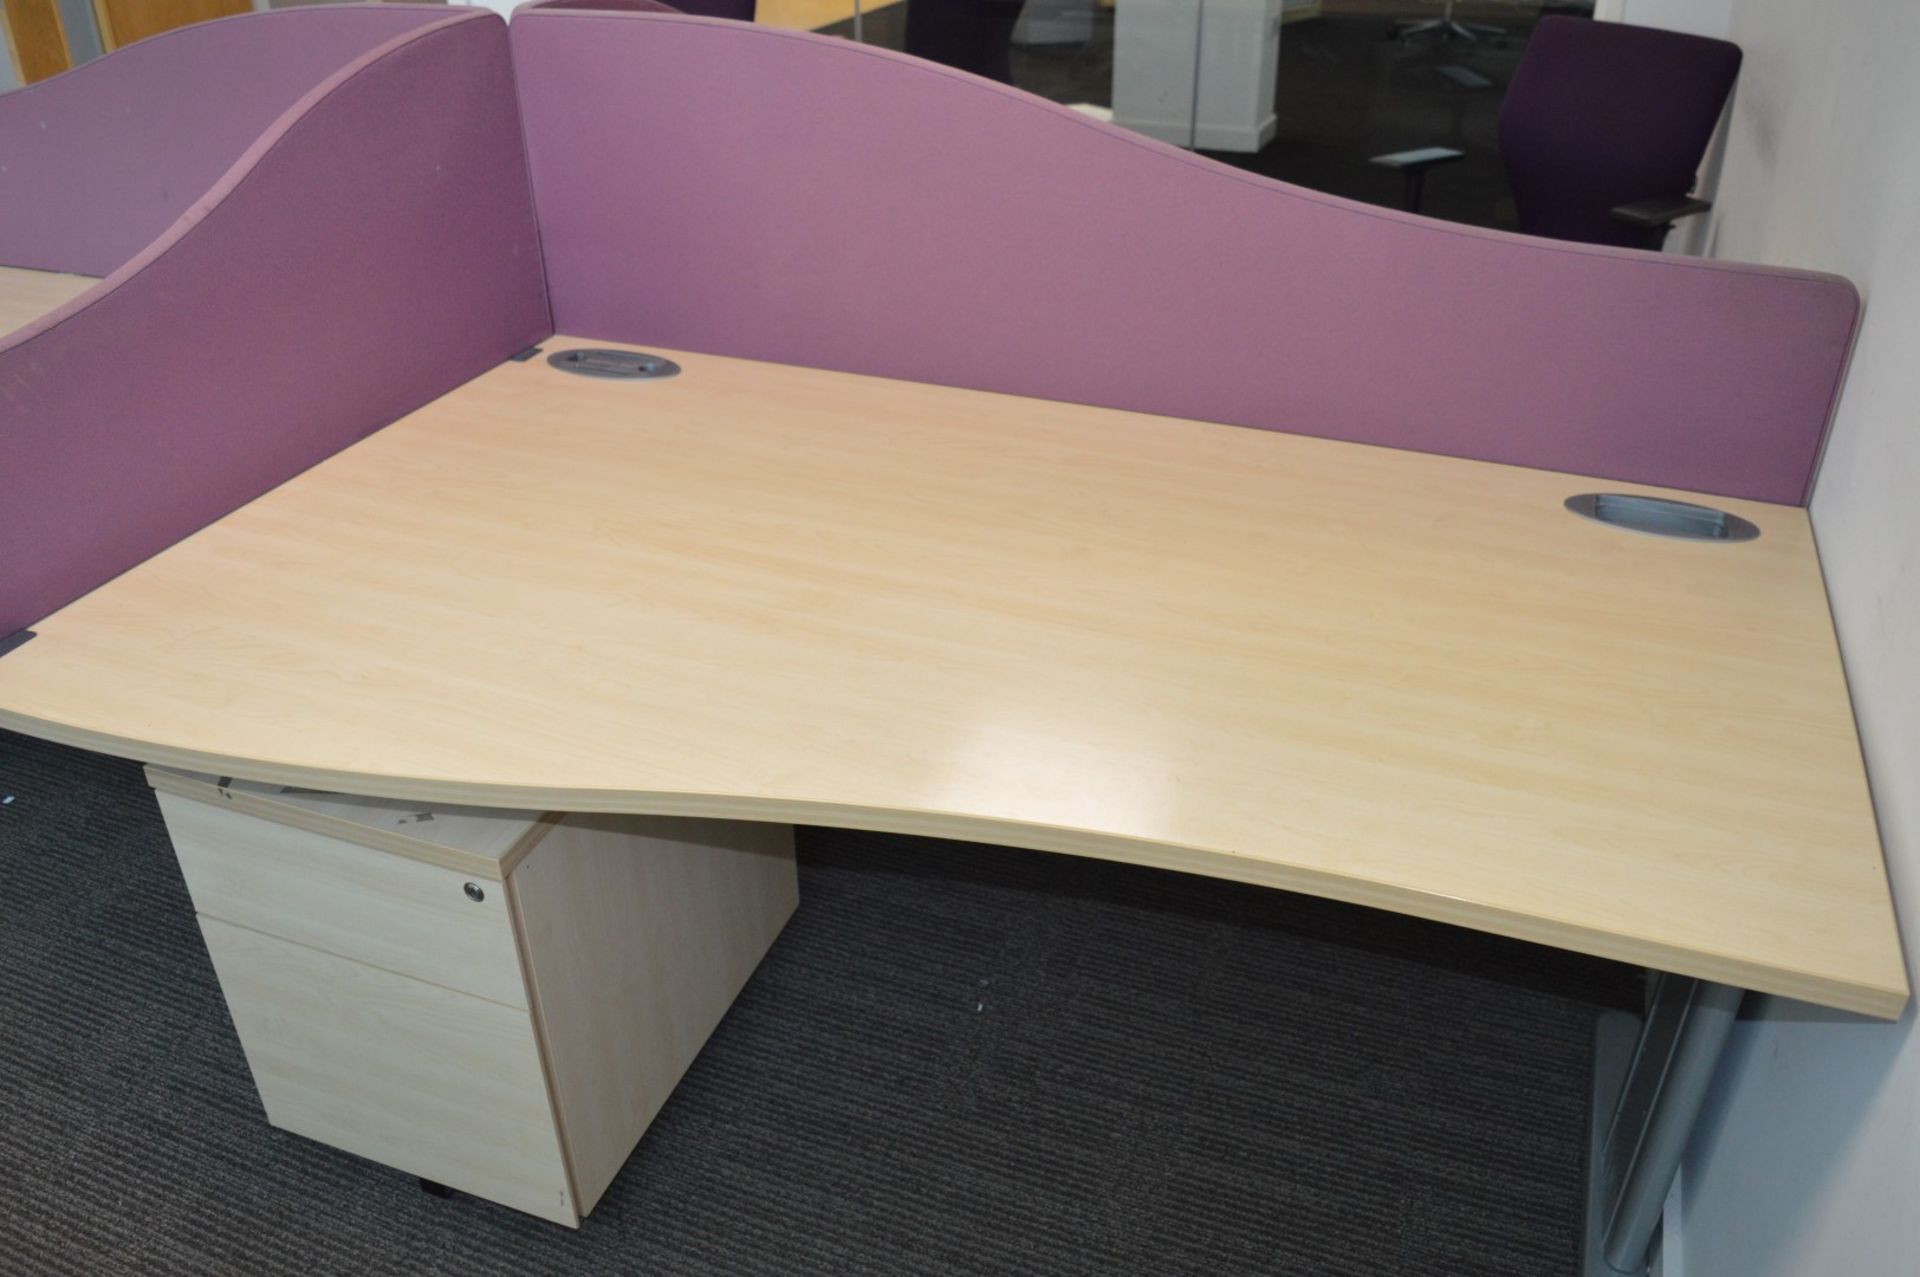 4 x Wave Office Desks With Privacy Partitions - Beech Finish With Purple Privacy Panels - Desk - Bild 11 aus 11